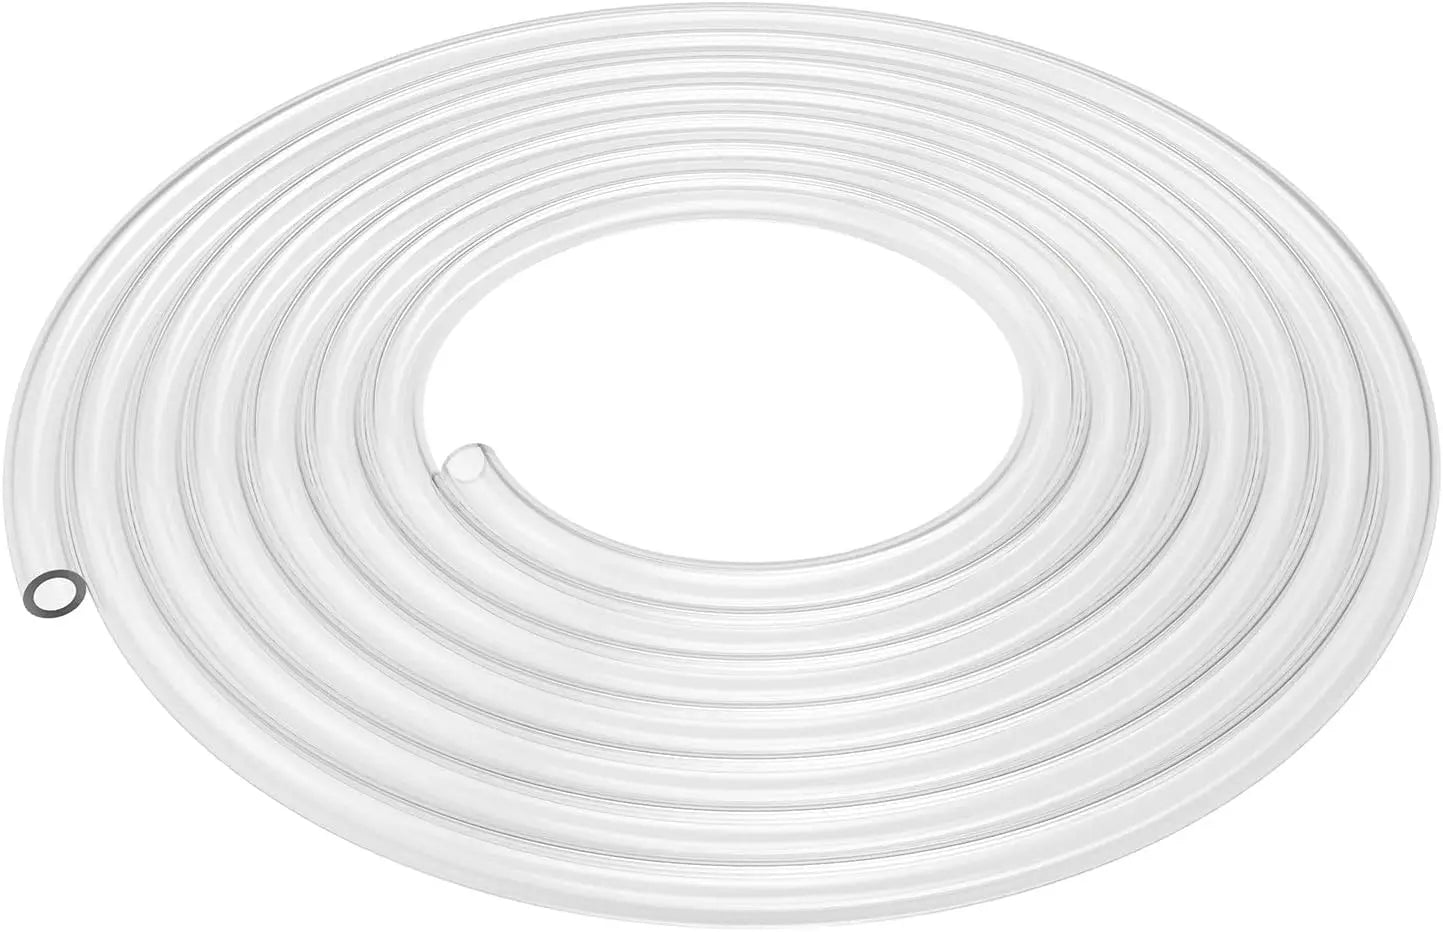 Silicone Tubing, High Temp Food Grade Pure Silicone Tubing Natural Silicone Tube 3/8 inch (9 mm) OD 1/4 inch (6 mm) ID, Highly Elastic and Strong